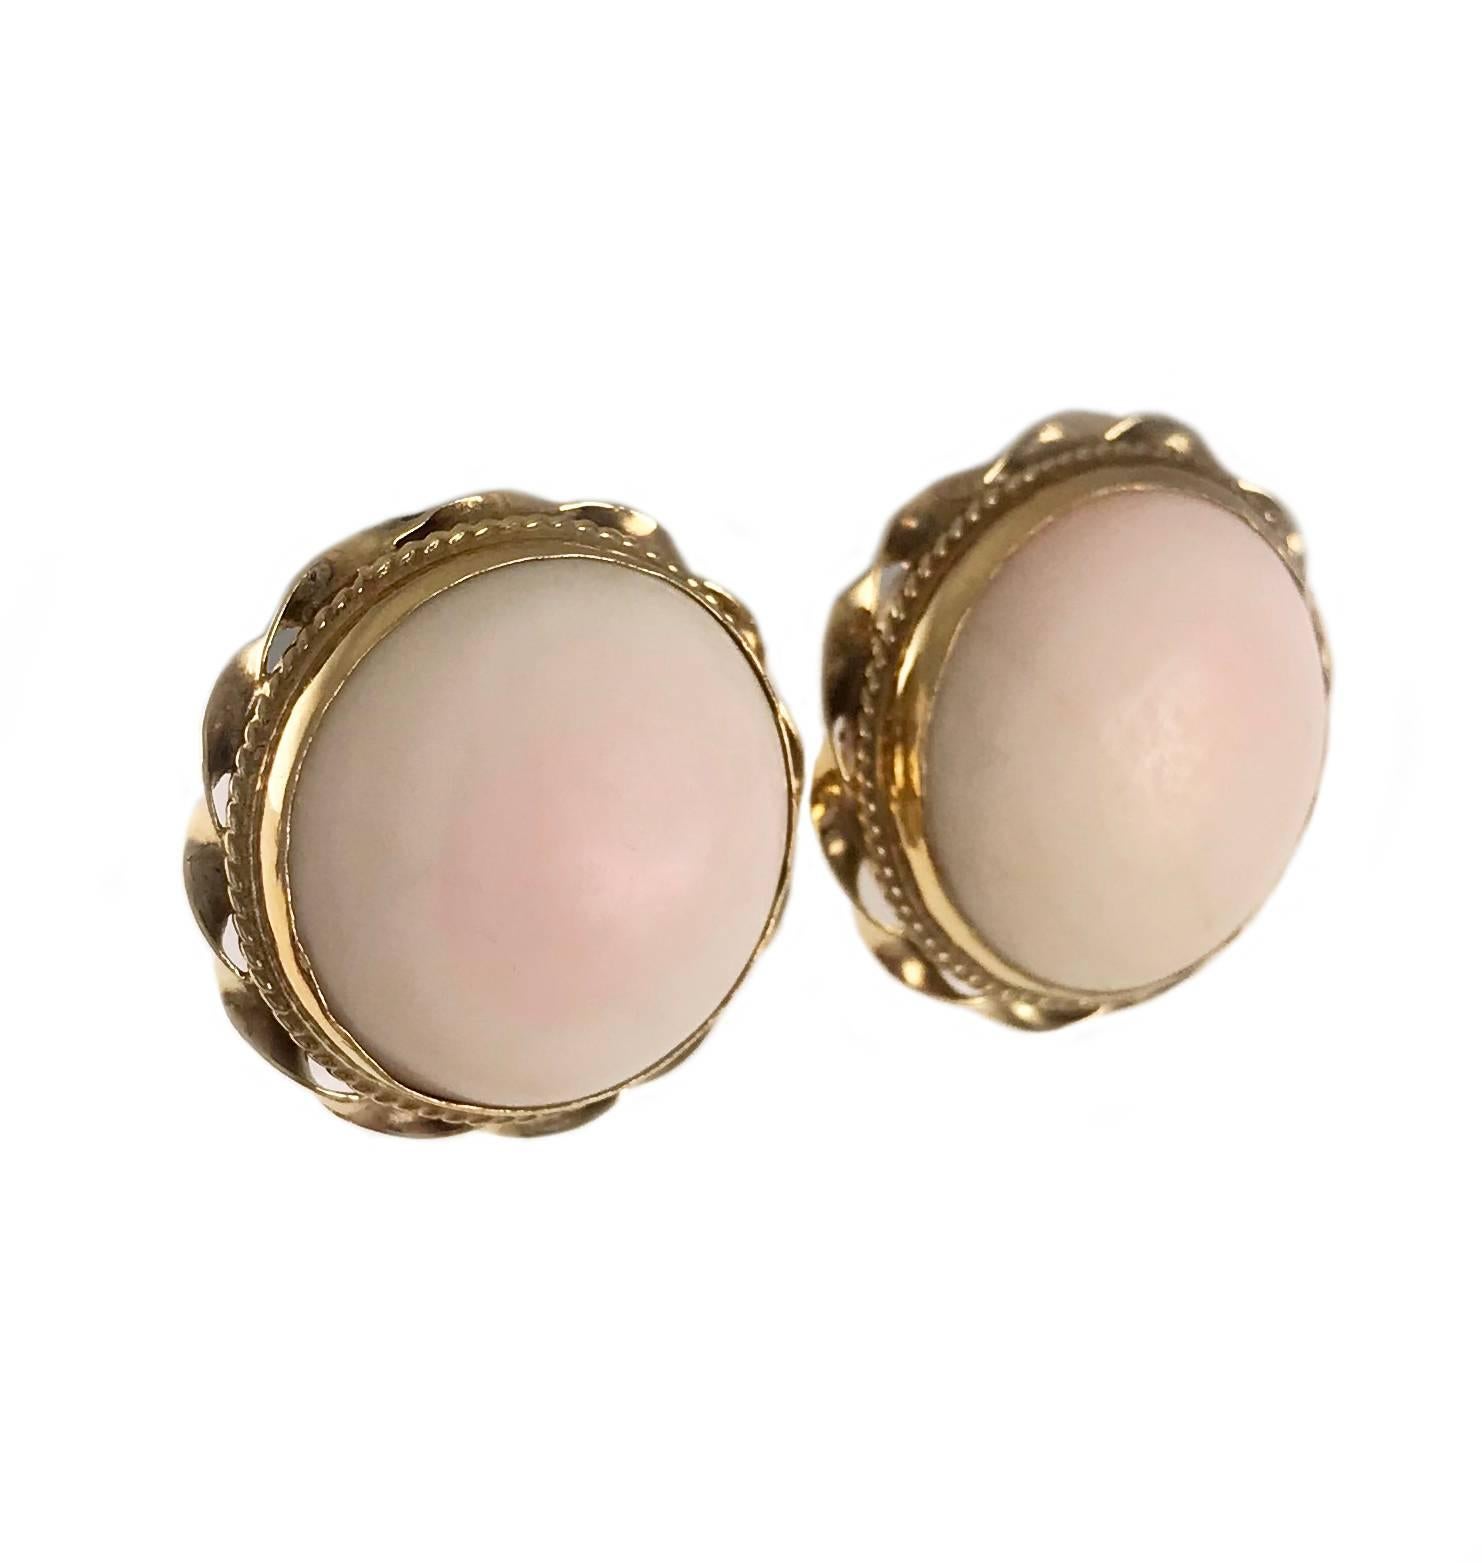 Antique 14k Yellow Gold Pink Coral Earrings, Angel Skin/Pink Blush Coral. Lovely and delicate Angel Skin Coral 15mm round cabochon earrings with twisted gold rope detail wrapped around bezel and screw back closure. A touch of pink hue makes these